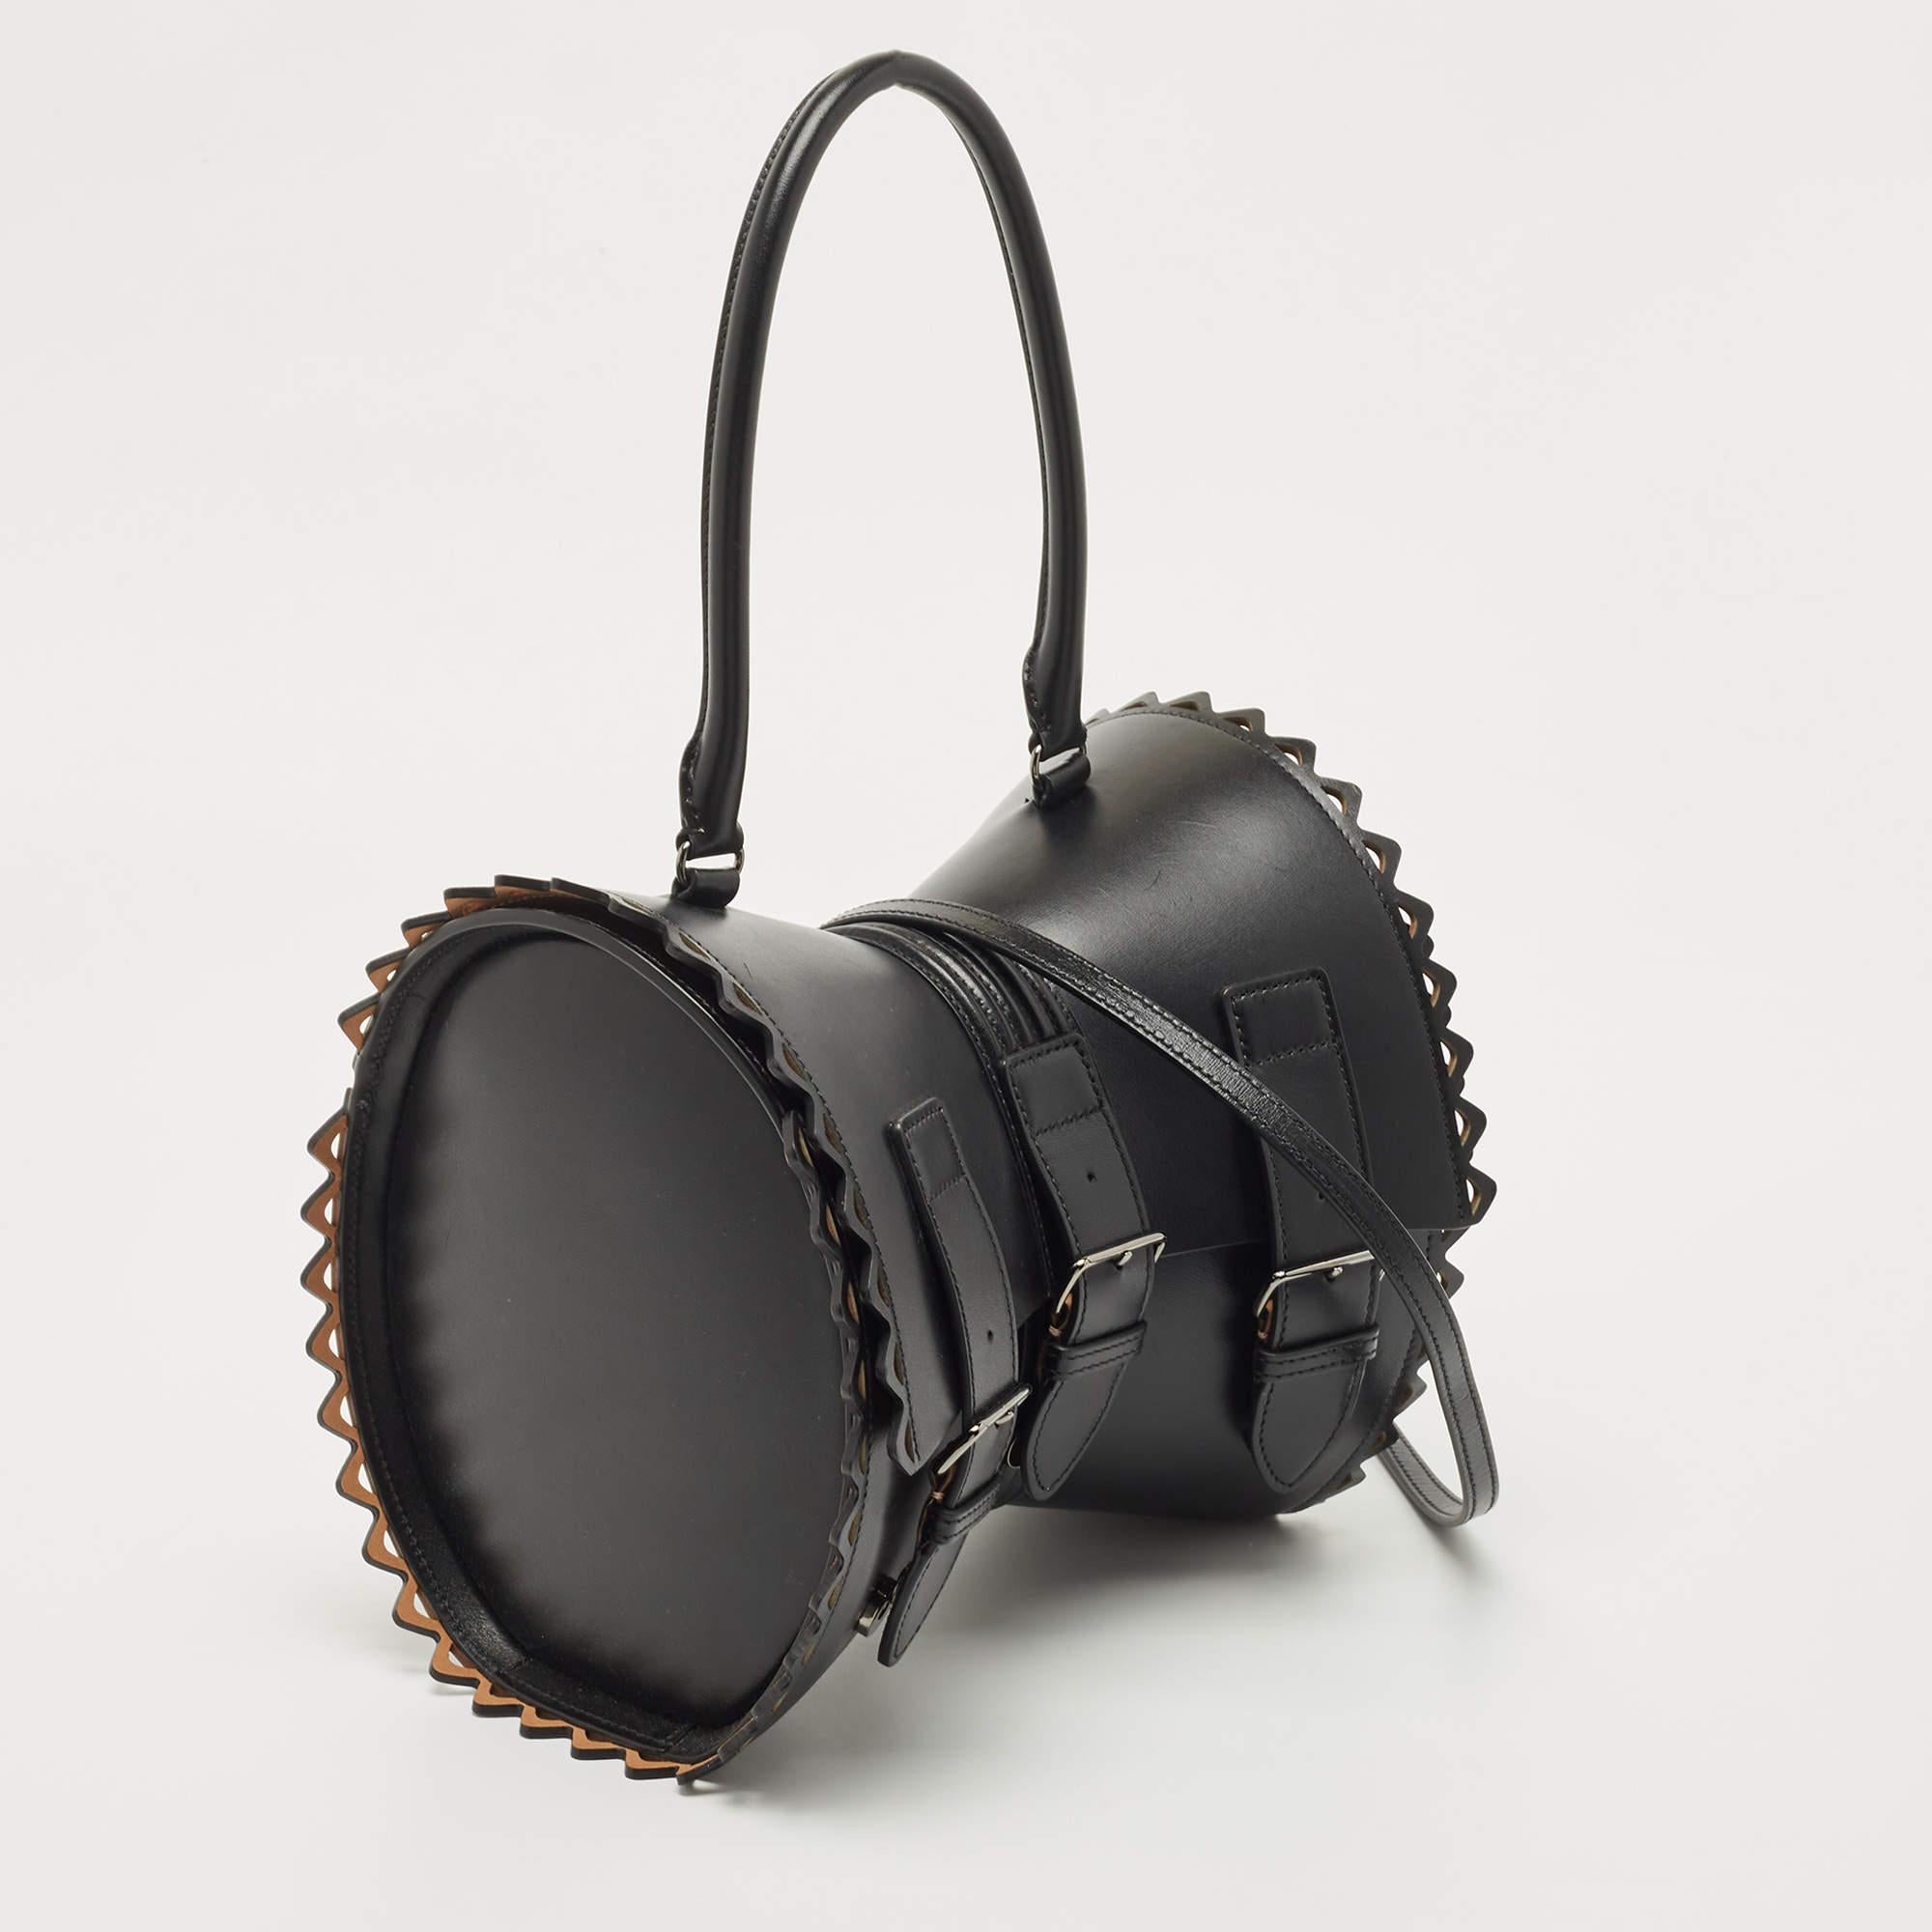 The Alaia Edition 1992 Corset bag is a timeless fashion piece. Crafted from premium black leather, it features a unique corset-inspired design with intricate stitching details. The bag exudes elegance and sophistication, making it a must-have